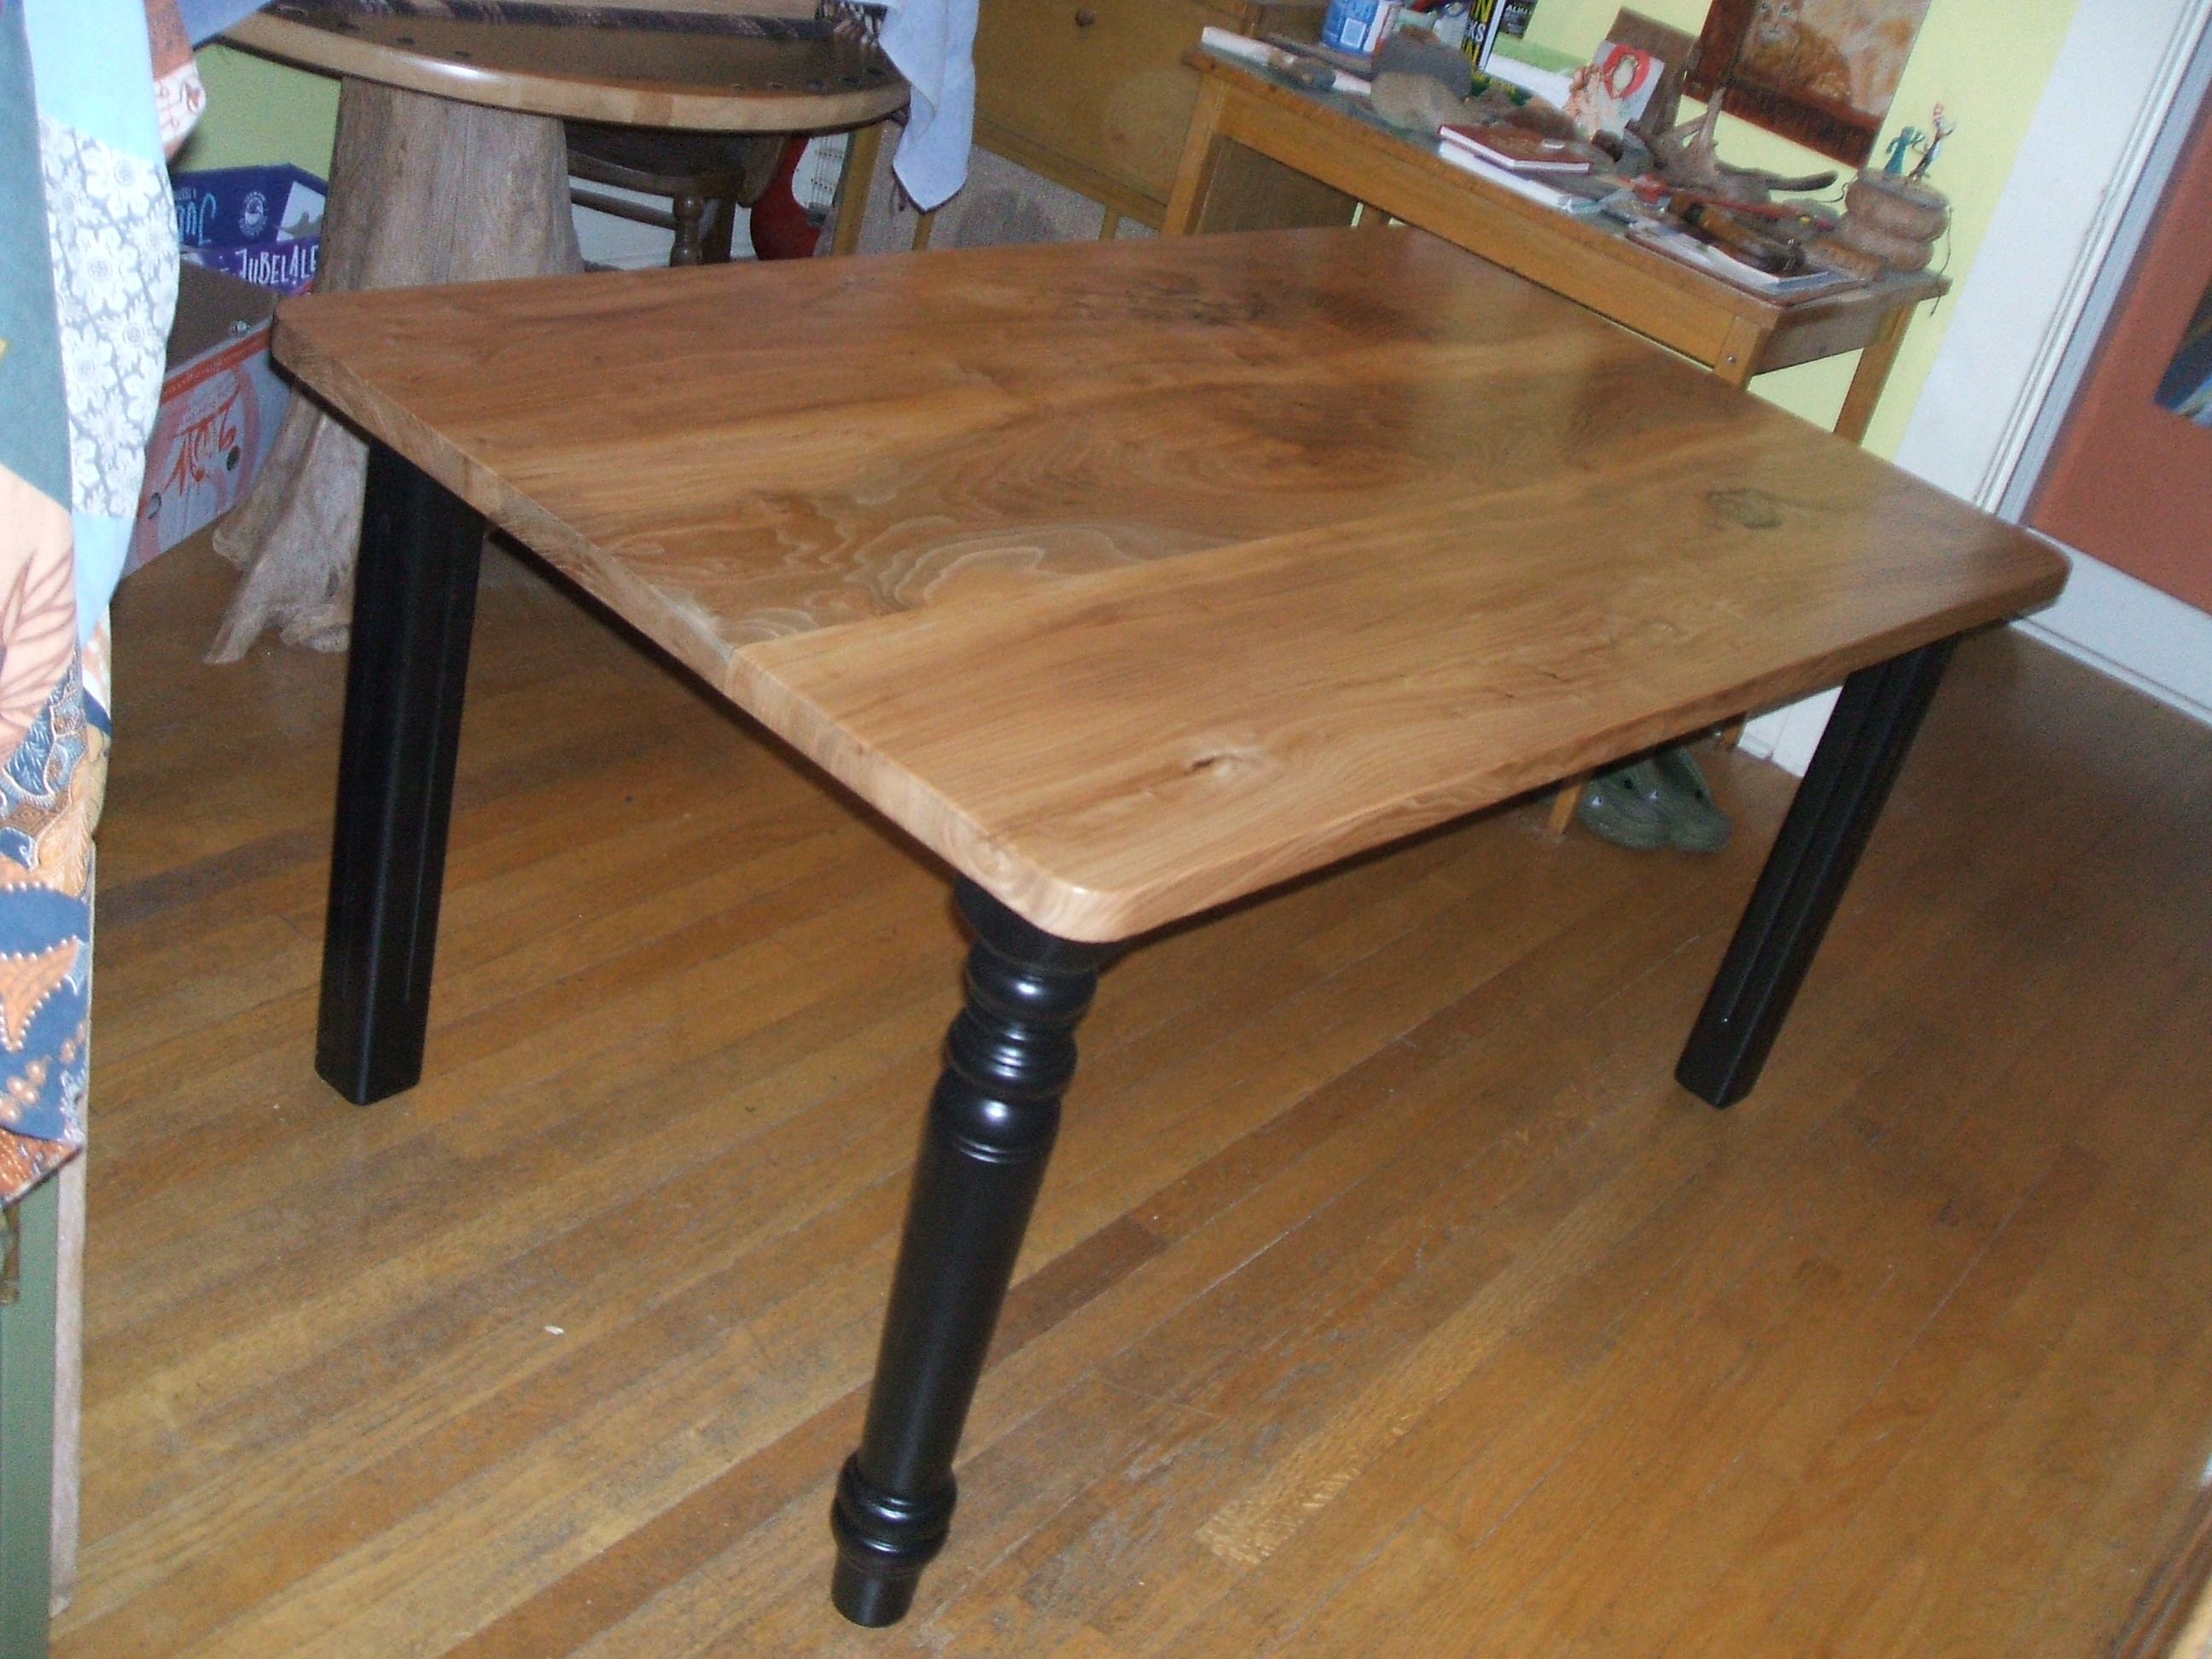 LOCAL ELM KITCHEN TABLE WITH REPURPOSED TABLES LEGS PAINTED BLACK